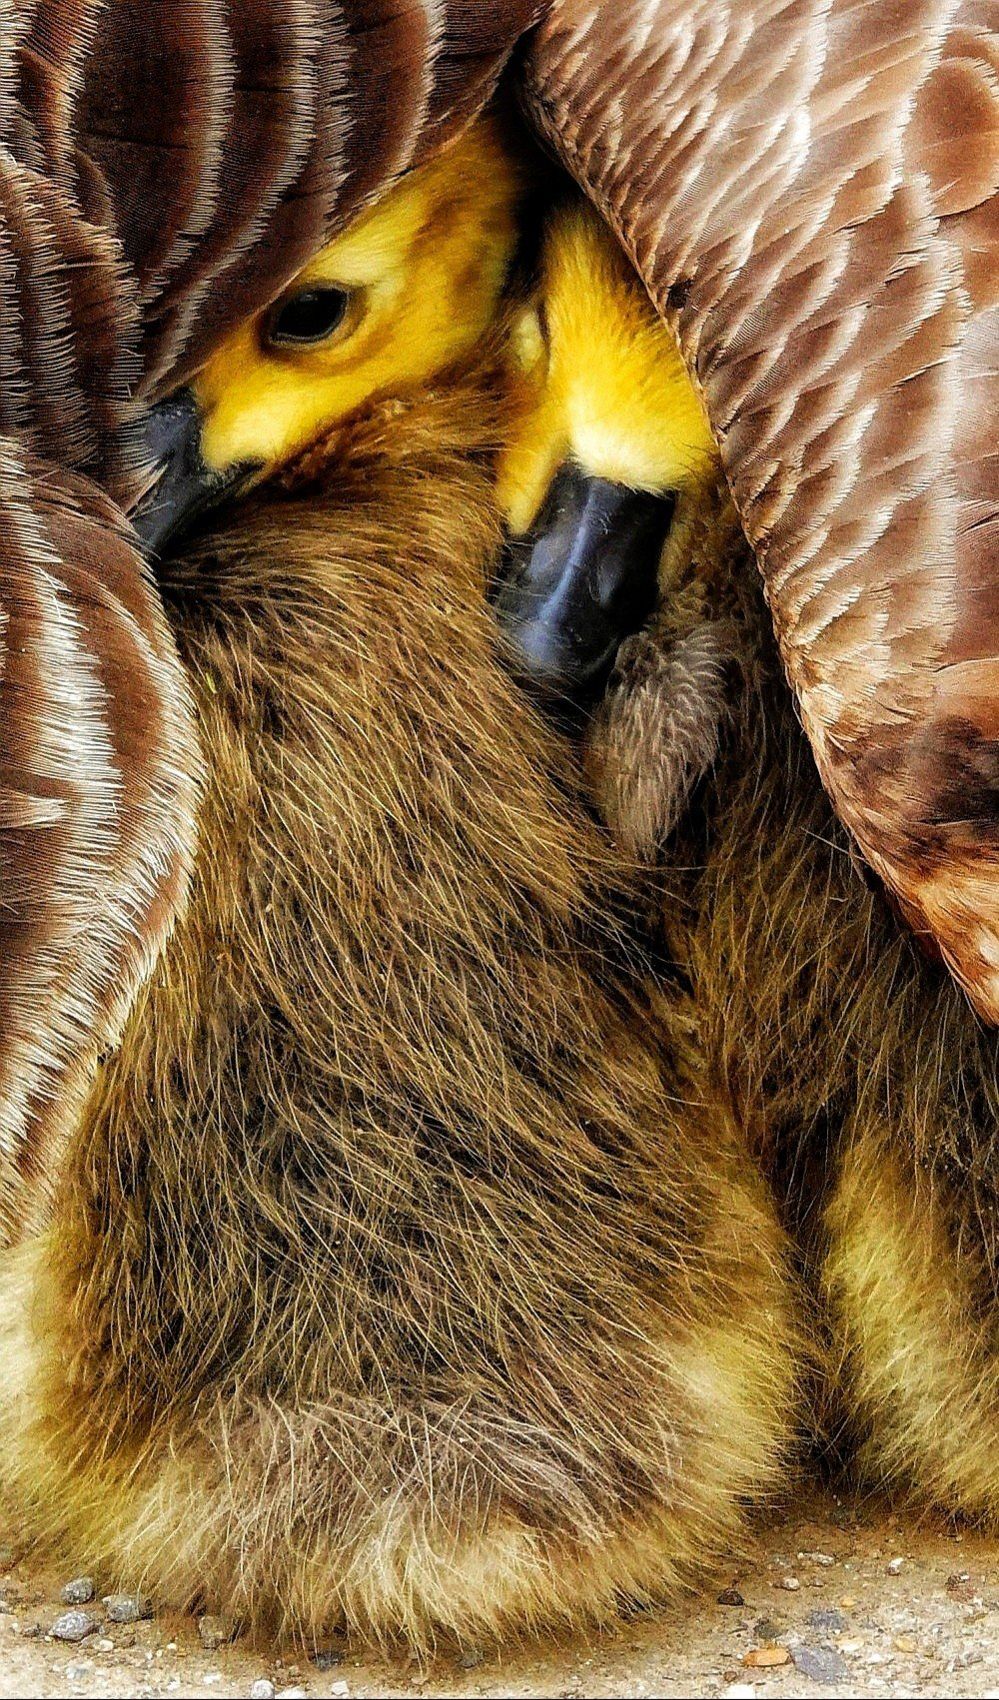 Goslings under mother's wing